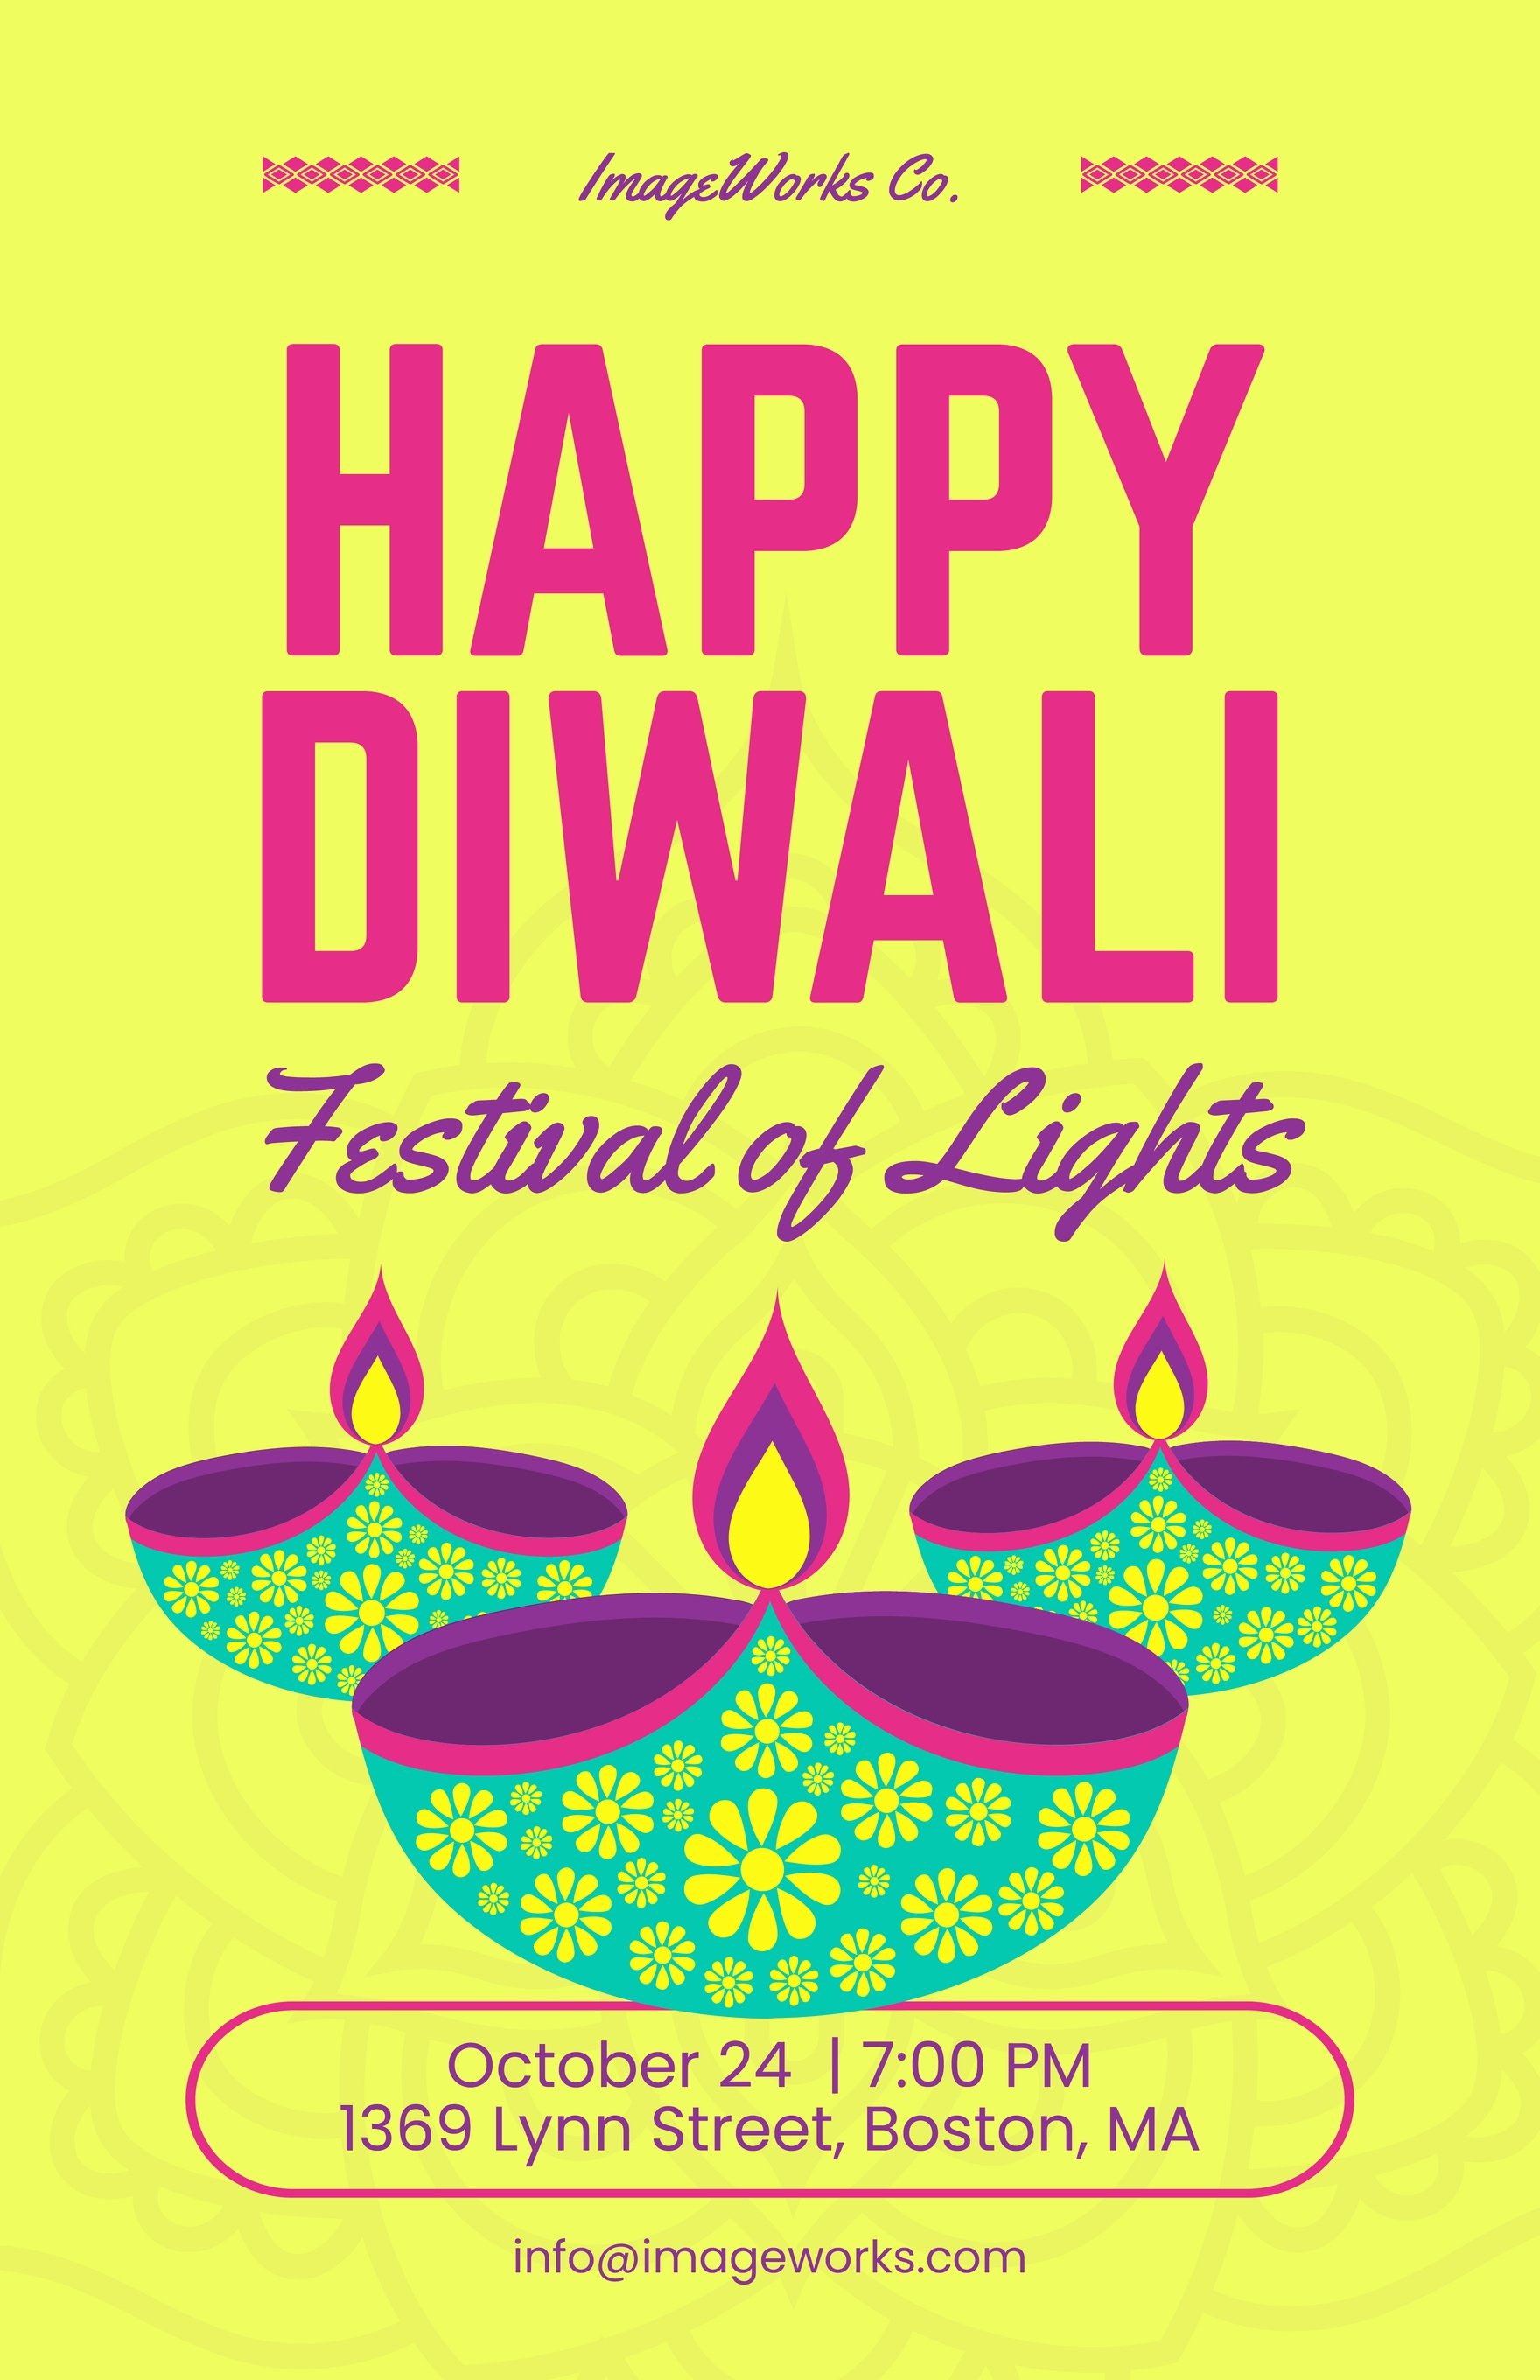 diwali-posters-word-templates-design-free-download-template